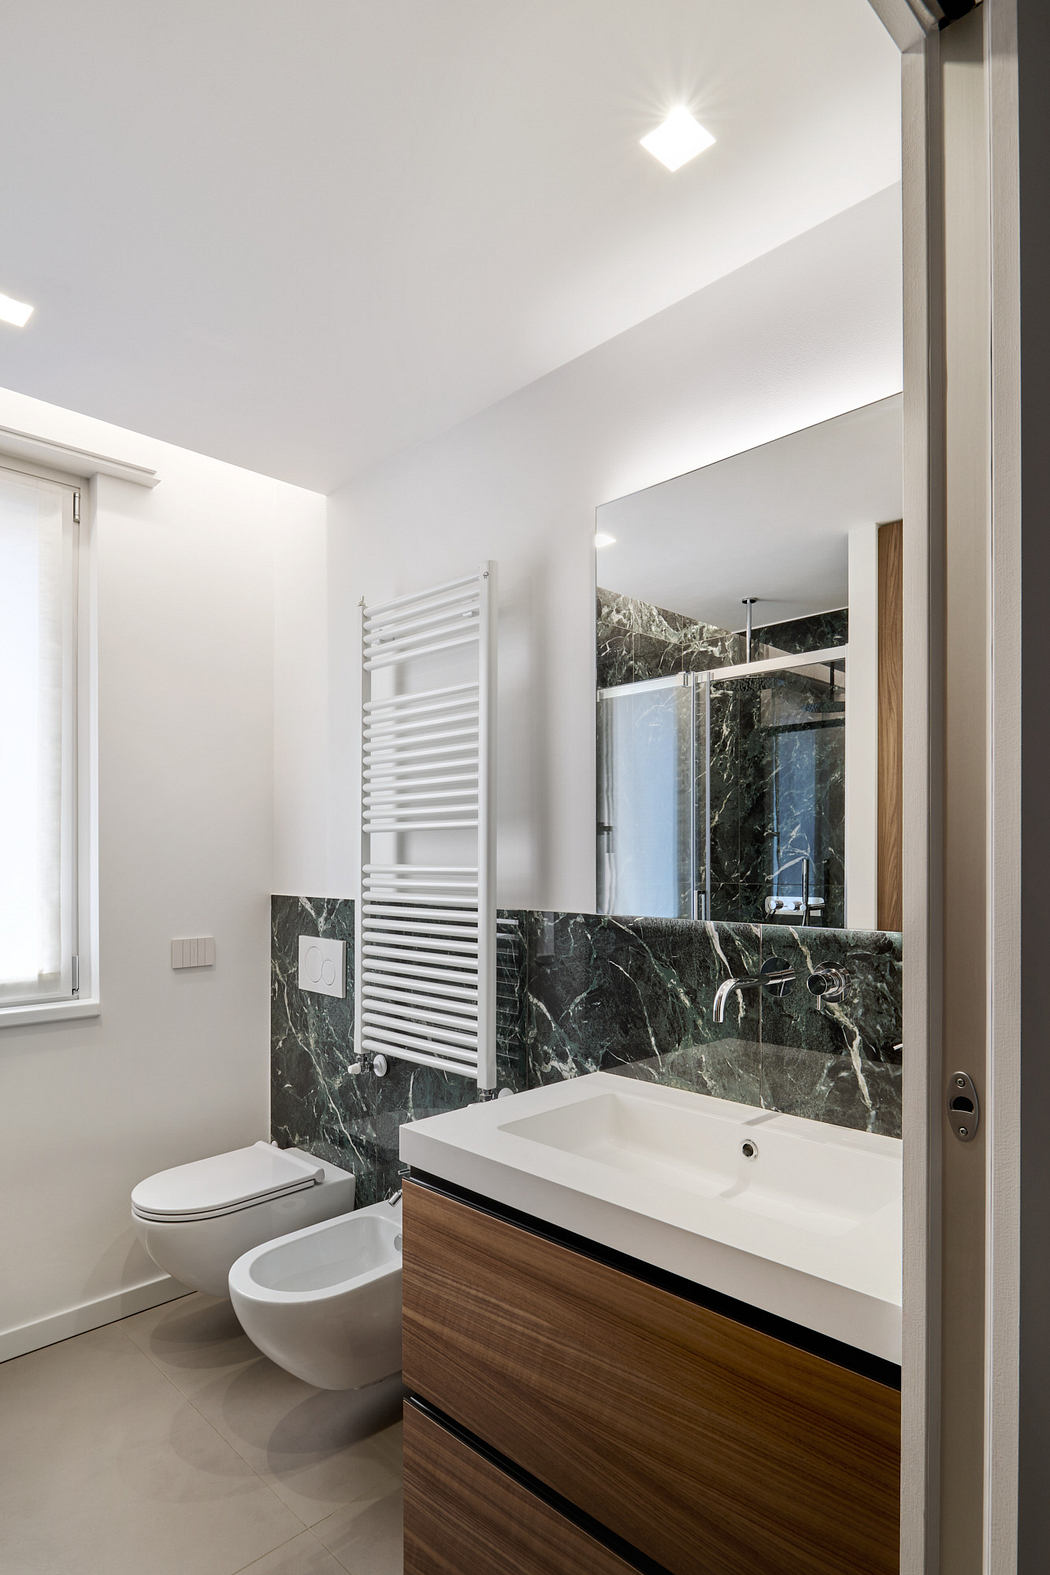 Contemporary bathroom with marble walls and sleek fixtures.